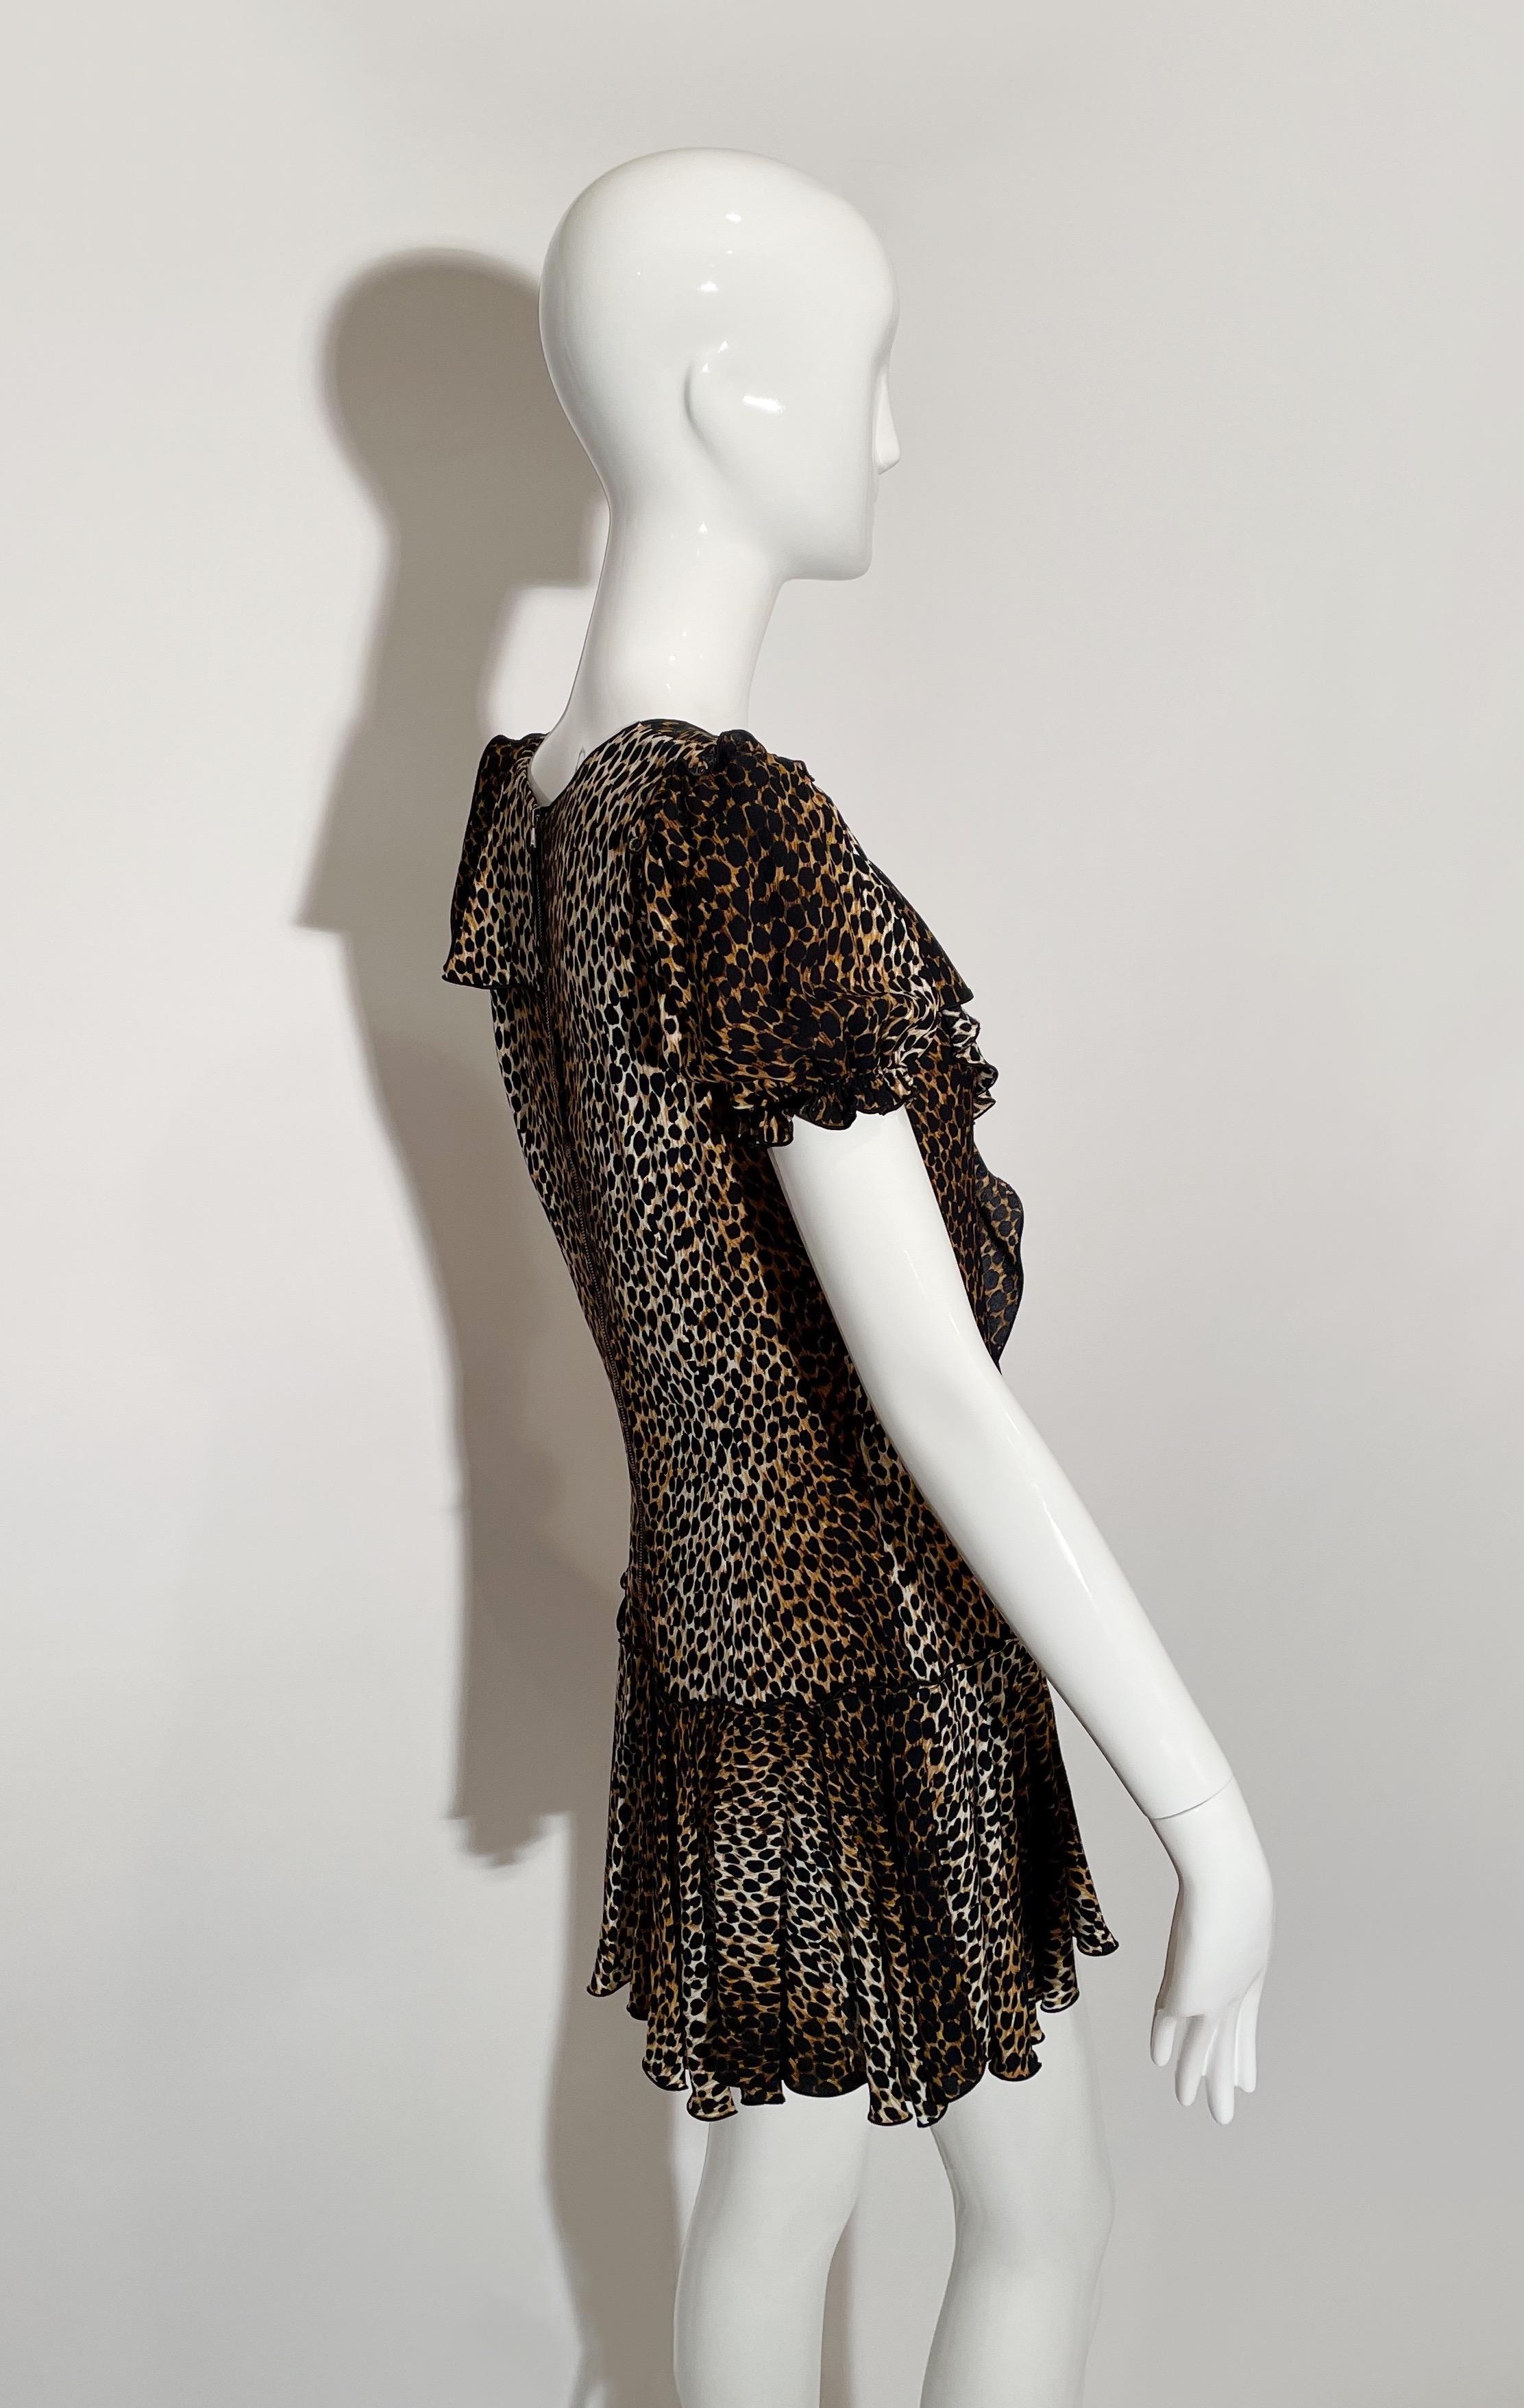 Dolce & Gabbana Leopard Mini Dress  In Excellent Condition For Sale In Los Angeles, CA